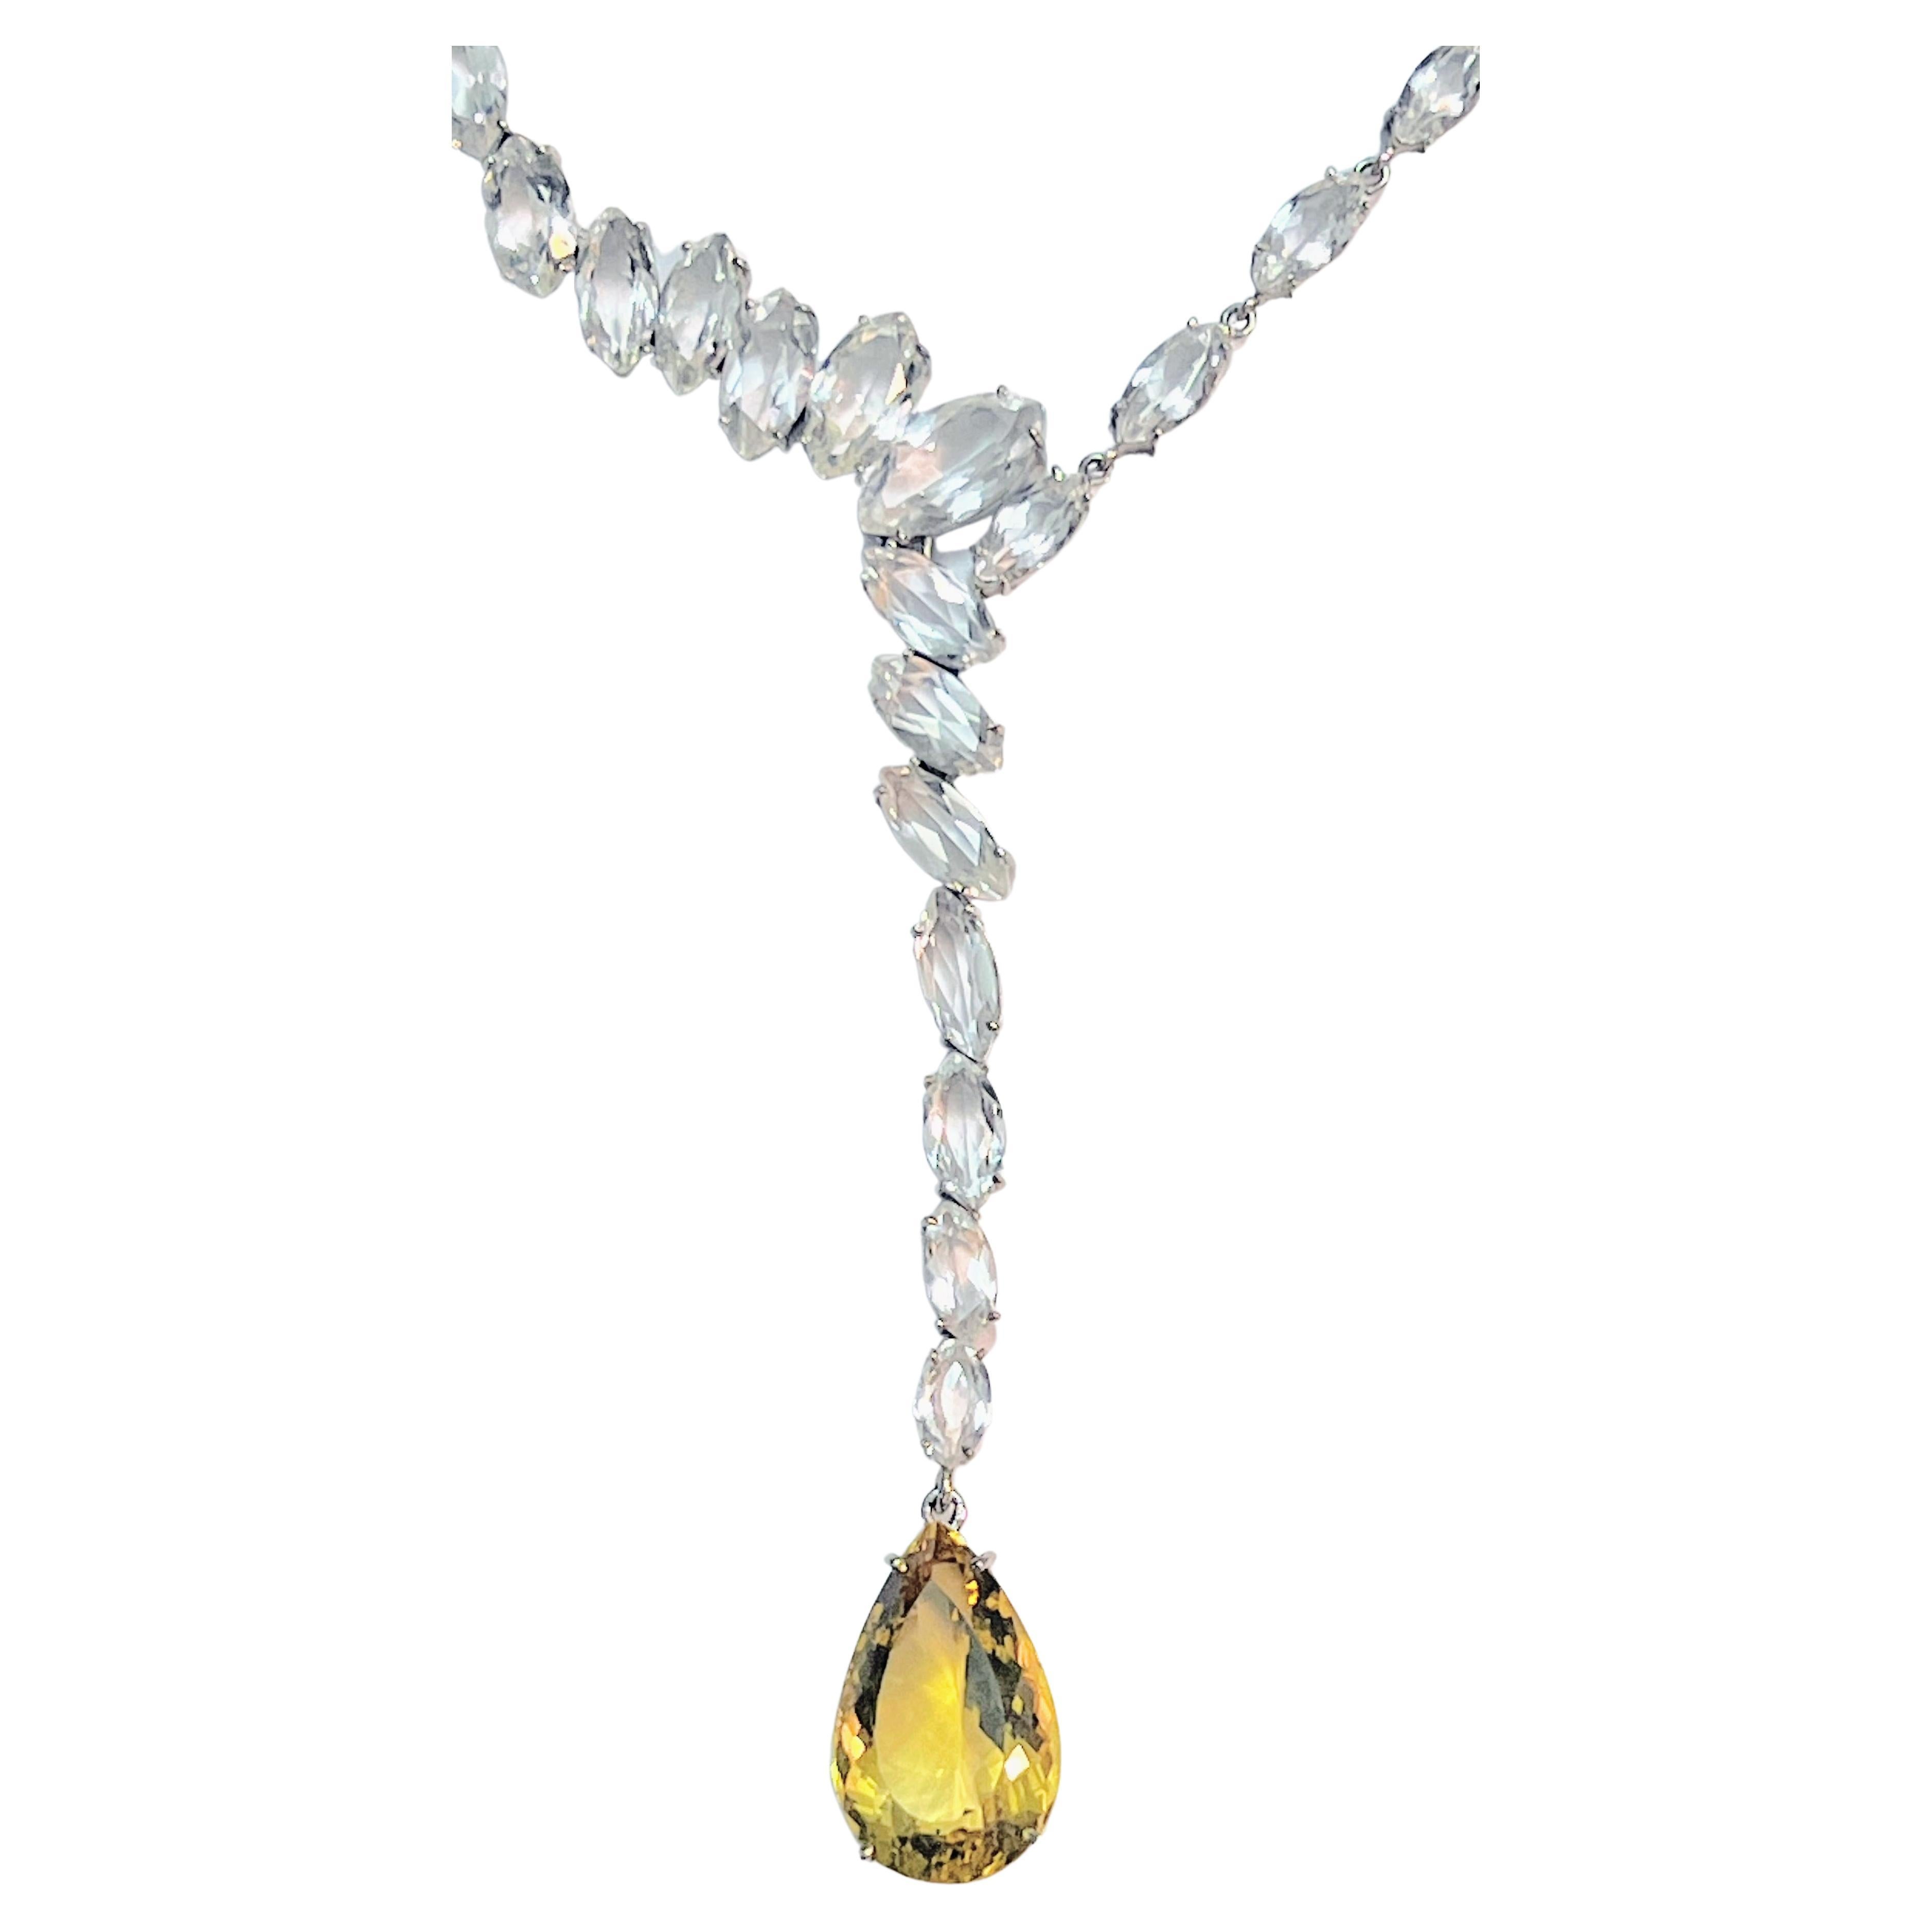 Mixed Cut 19ct Natural Yellow Citrine with 38 White Topaz Choker Drop Necklace 